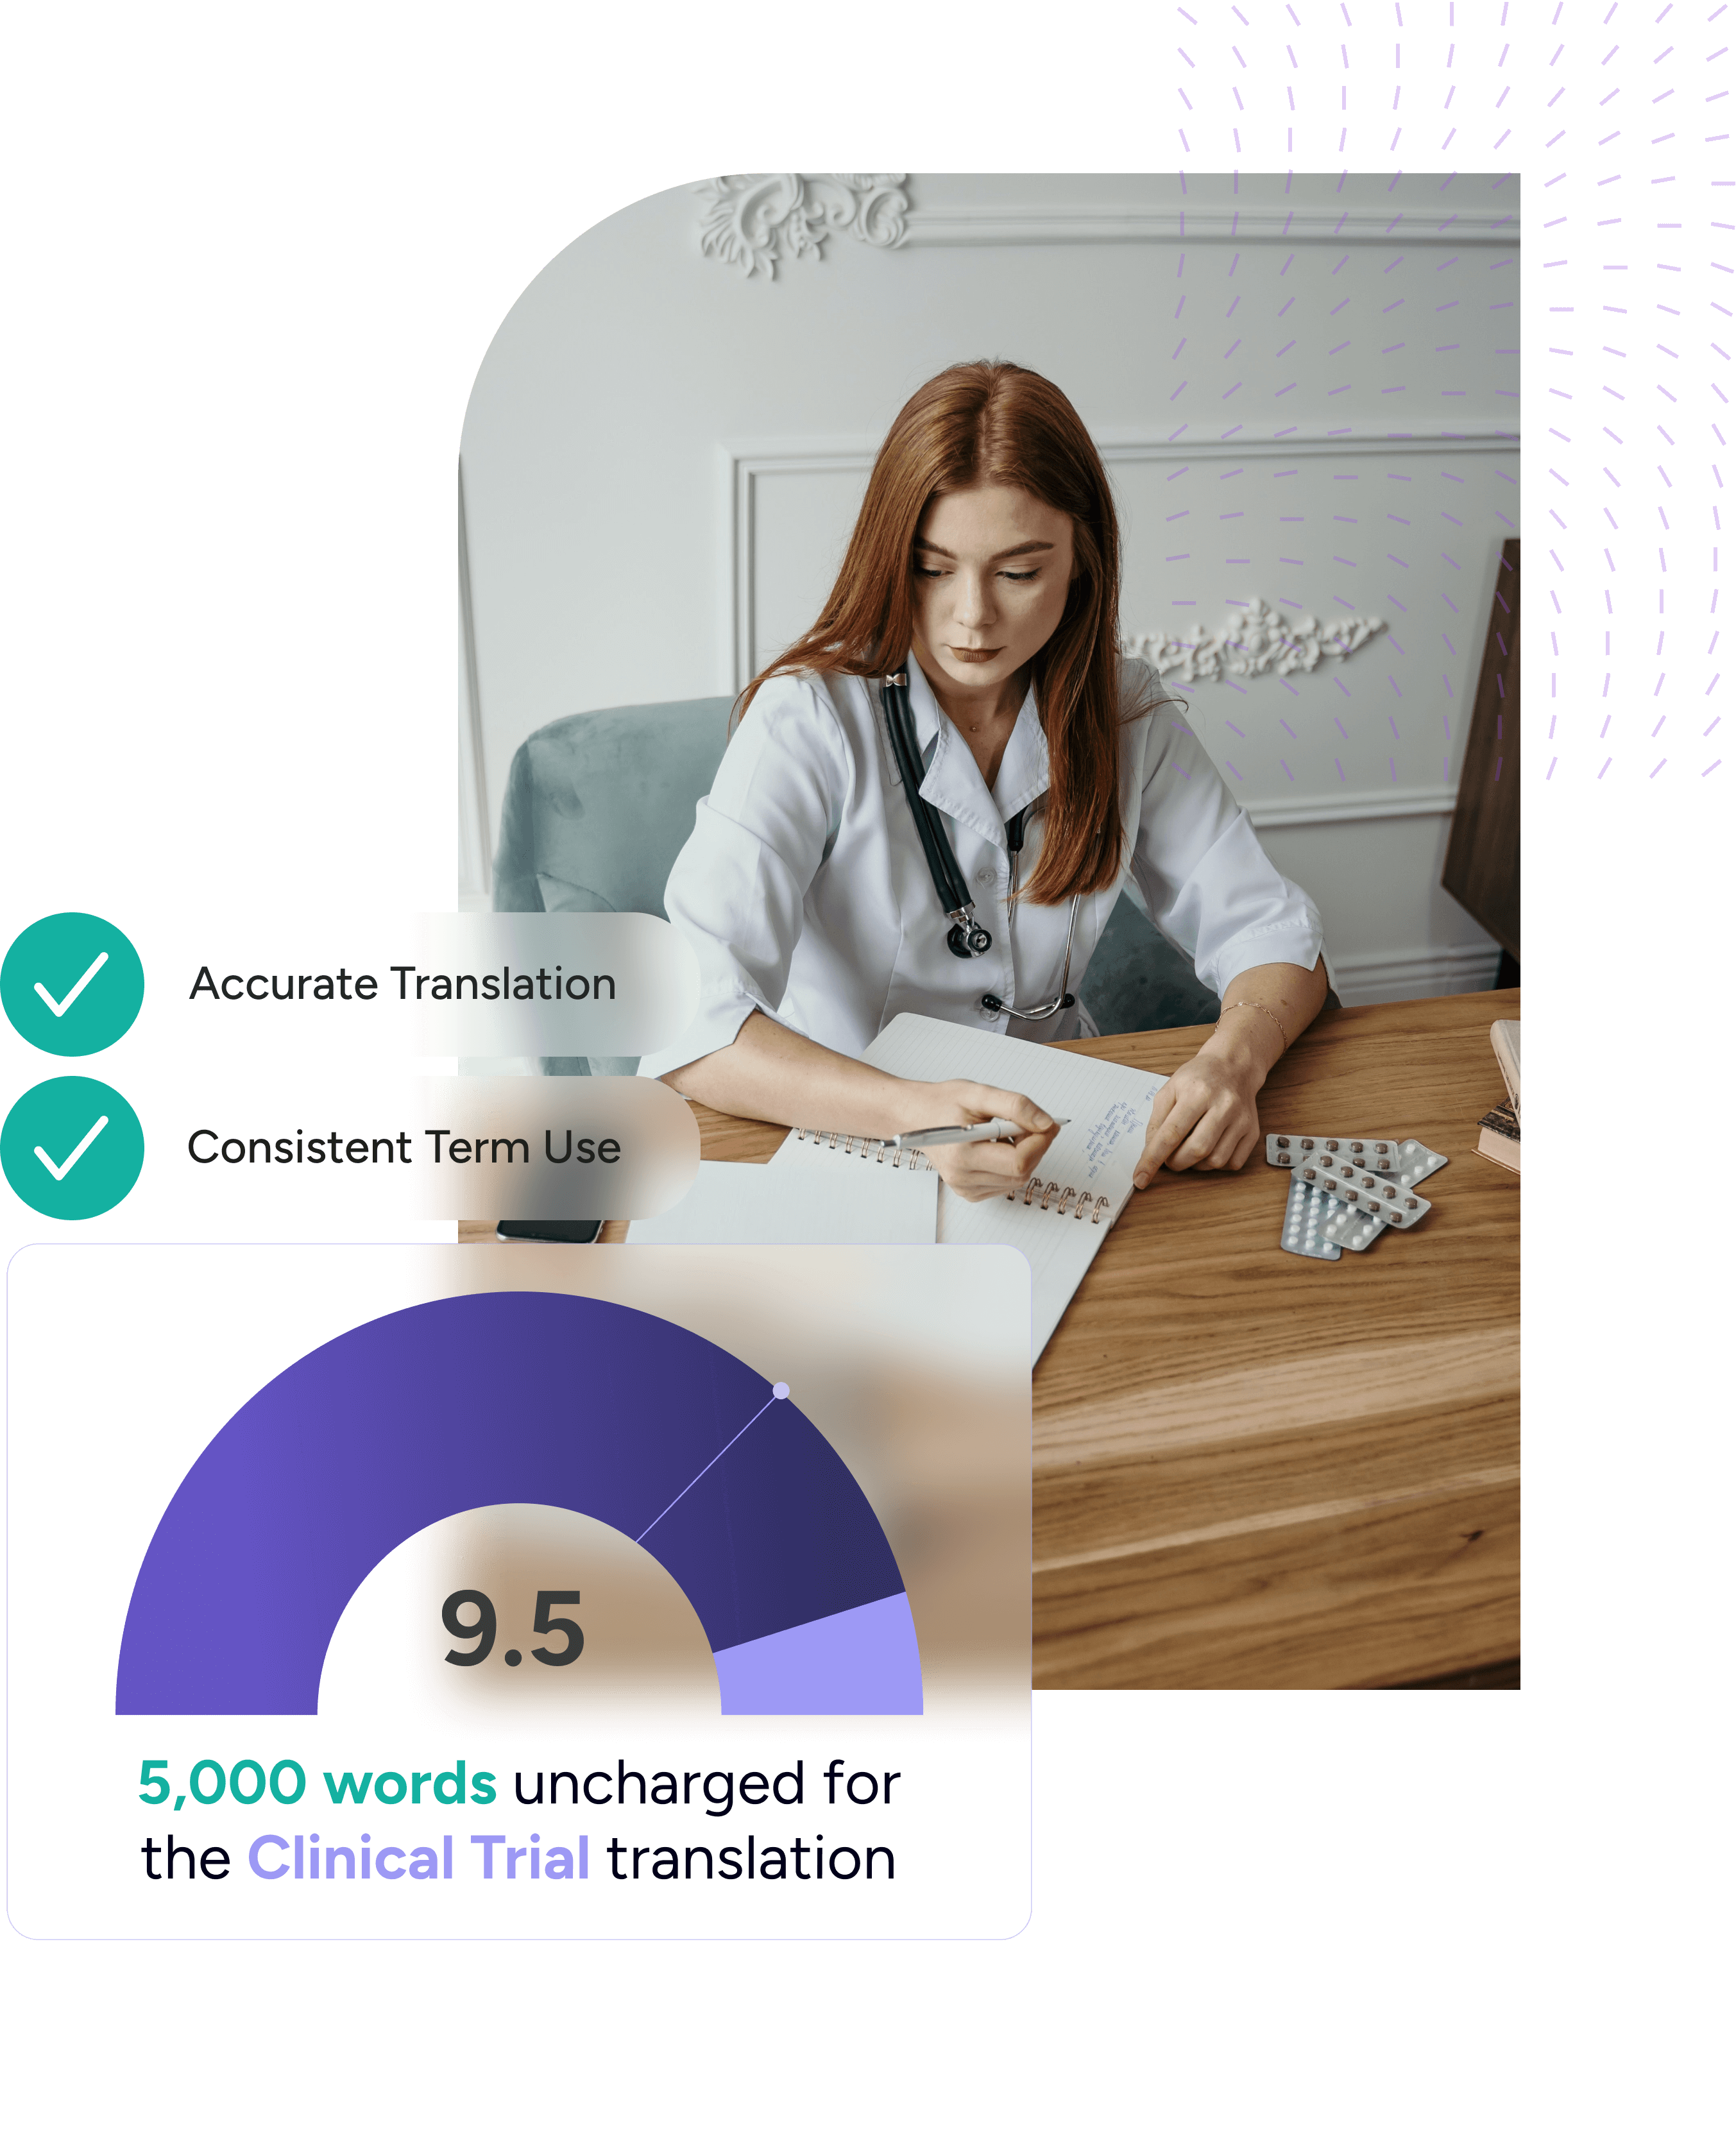 The specialist doctor takes notes in the notebook and sees that she has not been charged five thousand words thanks to the translation memory leverage. 